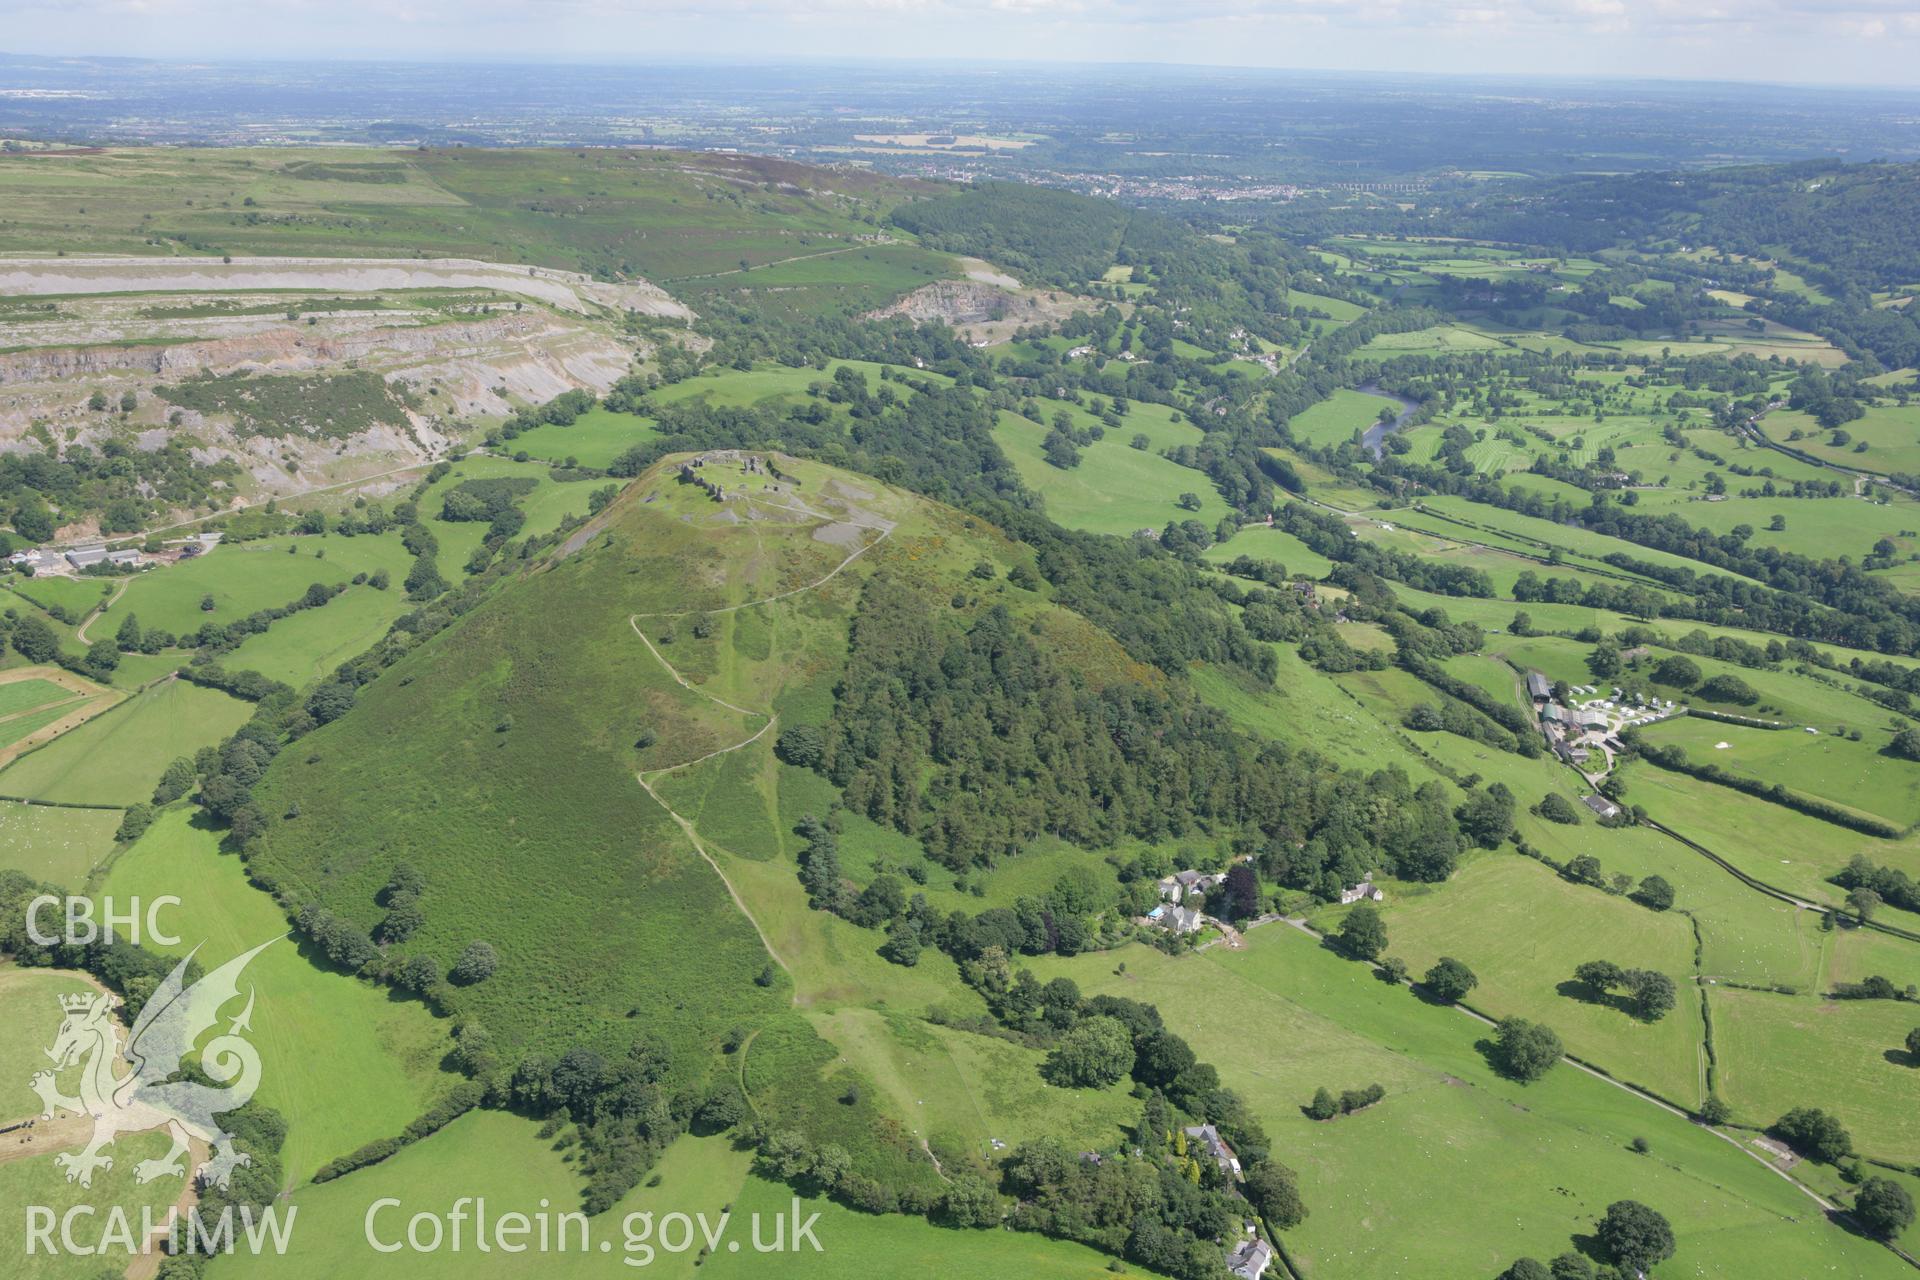 RCAHMW colour oblique aerial photograph of Castell Dinas Bran. Taken on 24 July 2007 by Toby Driver